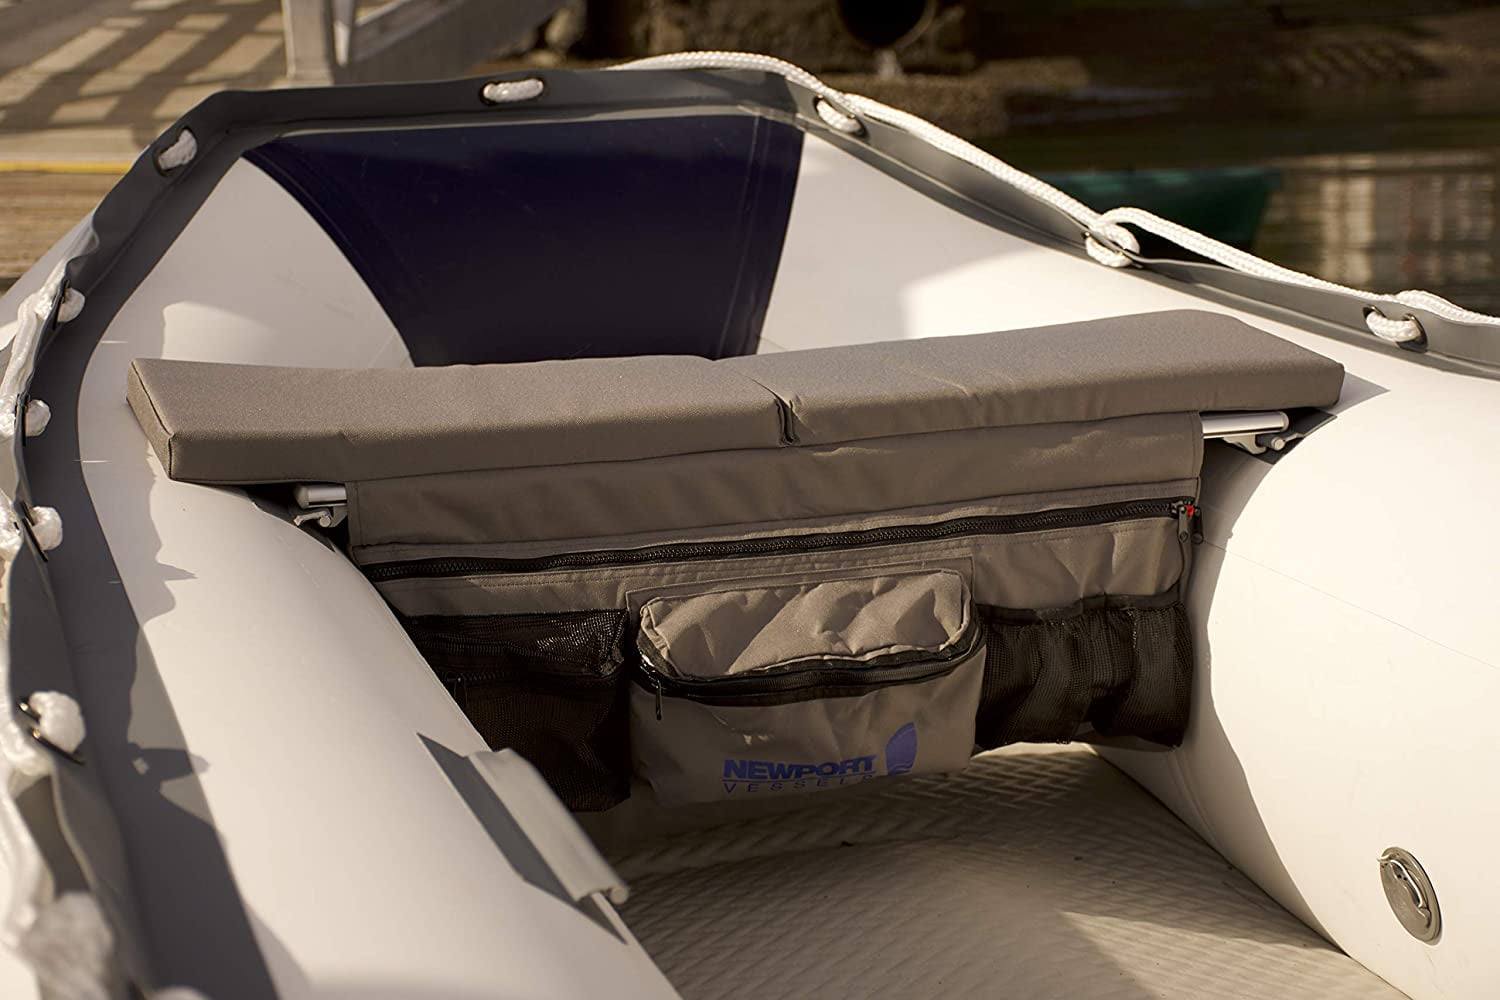 Newport Vessels Dinghy Inflatable Boat Seat Cushion & Underseat Storage